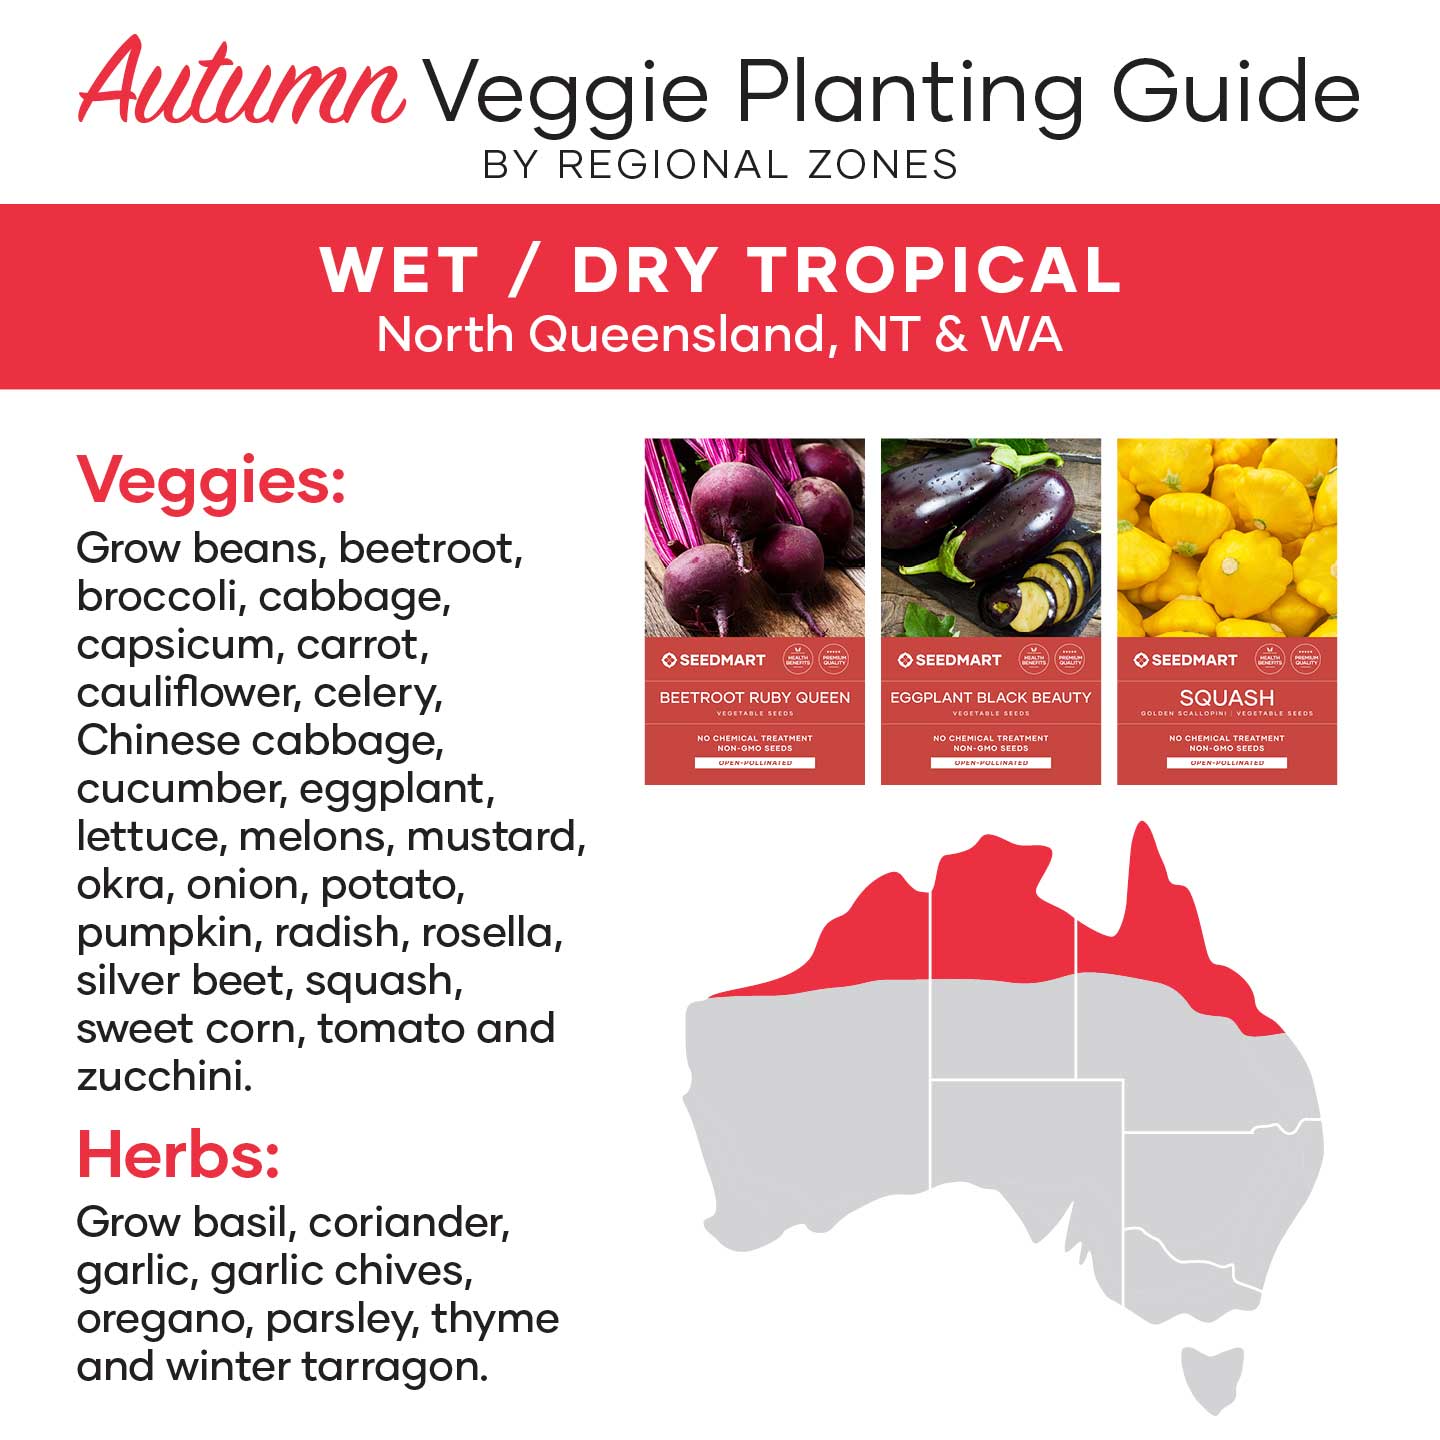 Which Vegetables to Grow in Tropical Zones of Australia in Autumn 